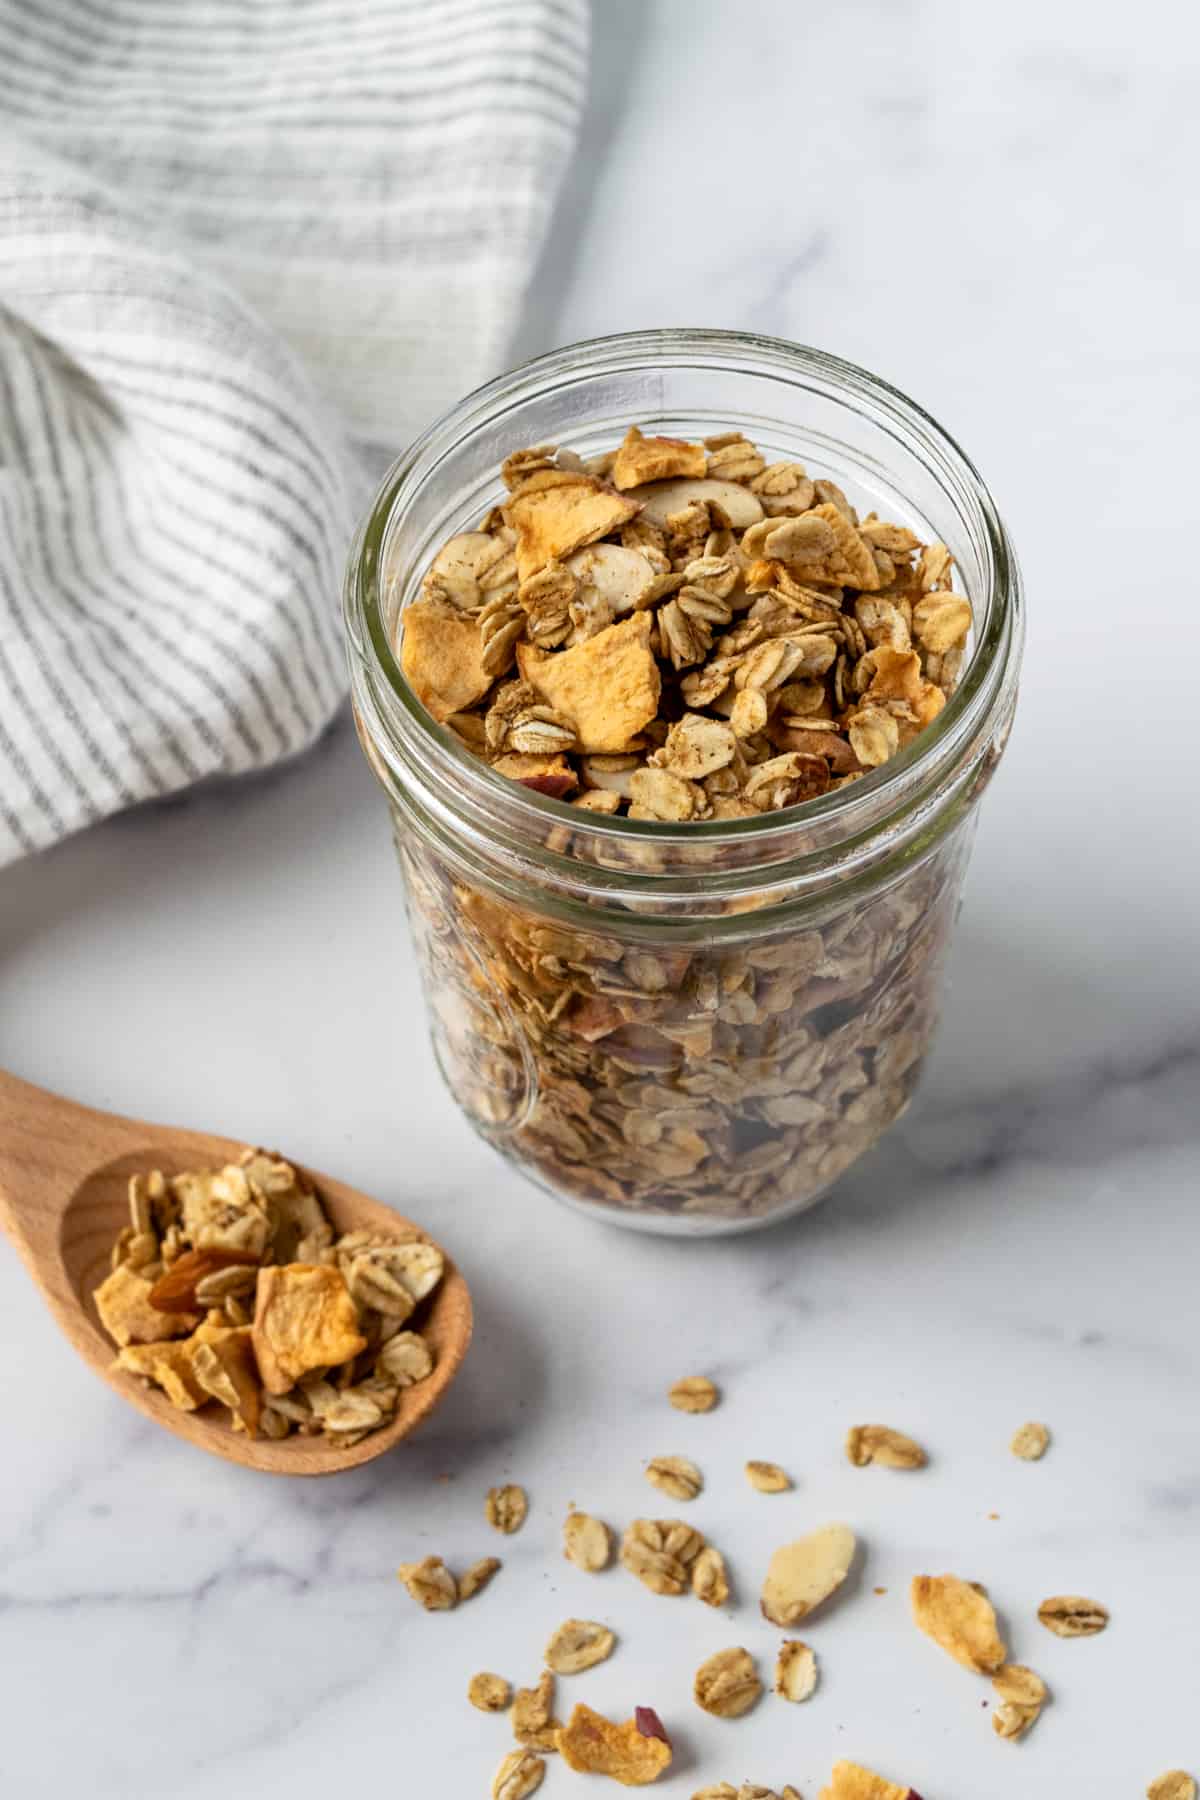 Apple Cinnamon Granola in a glass jar with a wooden spoon.